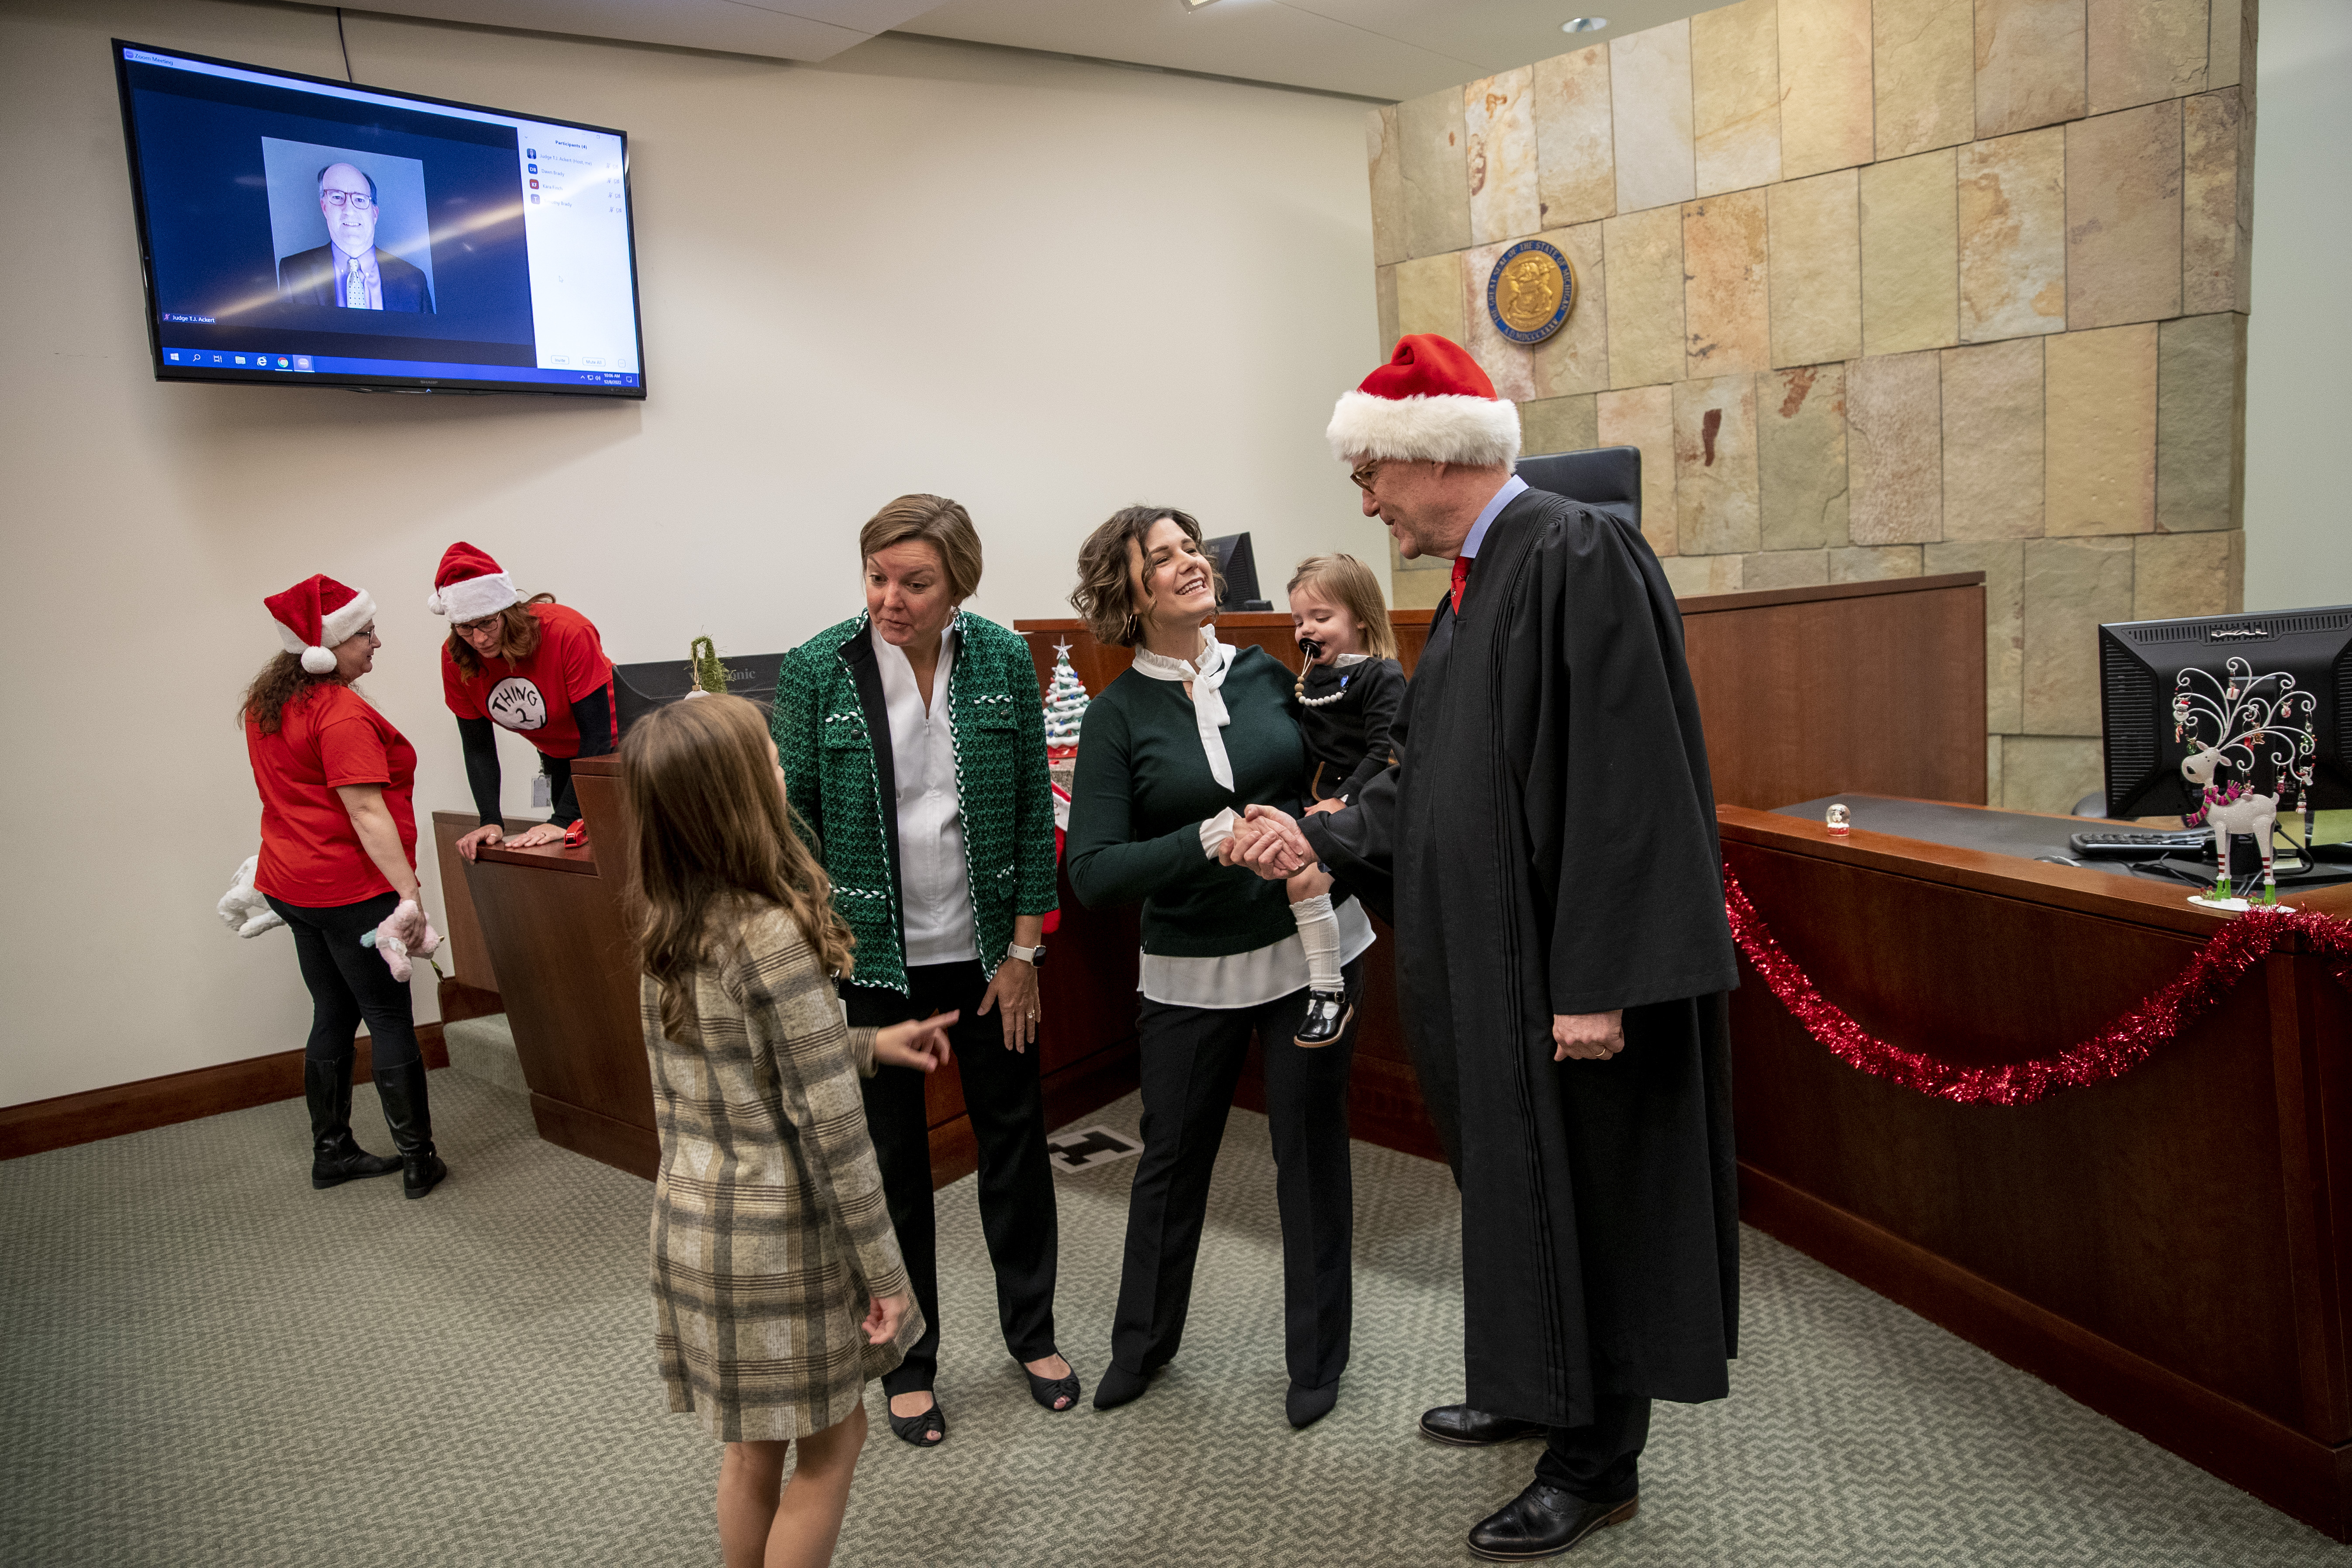 Judge T.J. Ackert, right, talks with Tammy Myers while preparing to pose for pictures during Adoption Day at the Kent County Courthouse in Grand Rapids on Thursday, Dec. 8, 2022. Tammy and Jordan Myers are the biological parents of 1-year-old twins Eames and Ellison. Lauren Vermilye, a surrogate, gave birth to the twins after Tammy went through breast cancer treatment and has no claim to the babies. The Myers family was able to adopt the twins after convincing the court system to grant them custody. (Cory Morse | MLive.com)